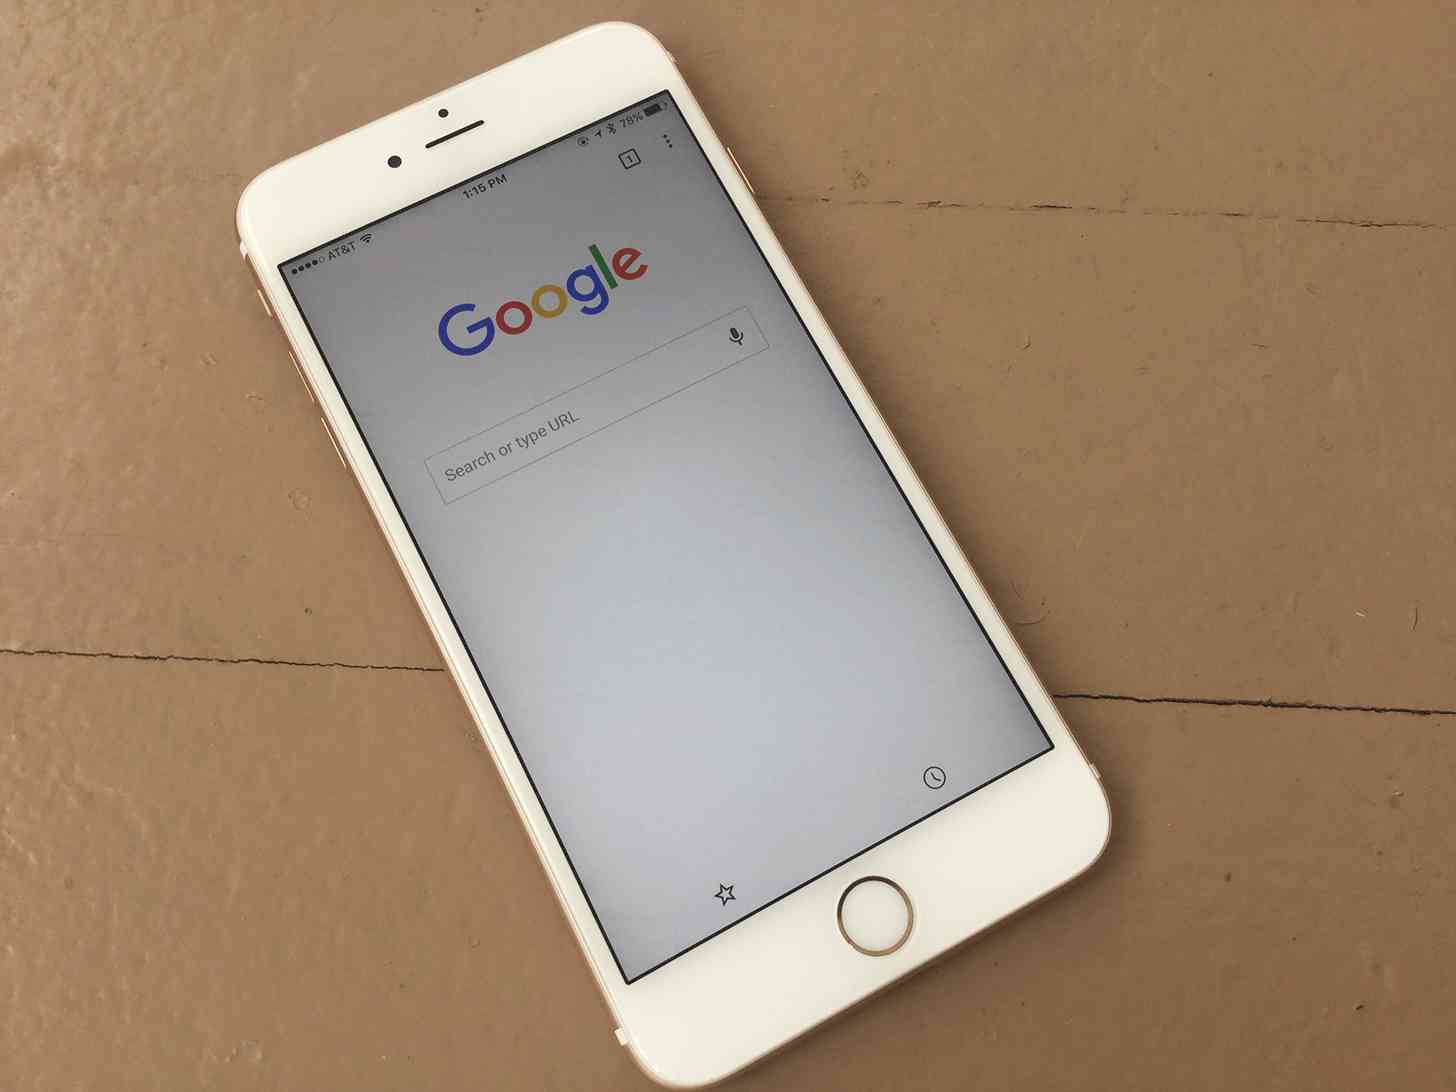 Google search iPhone